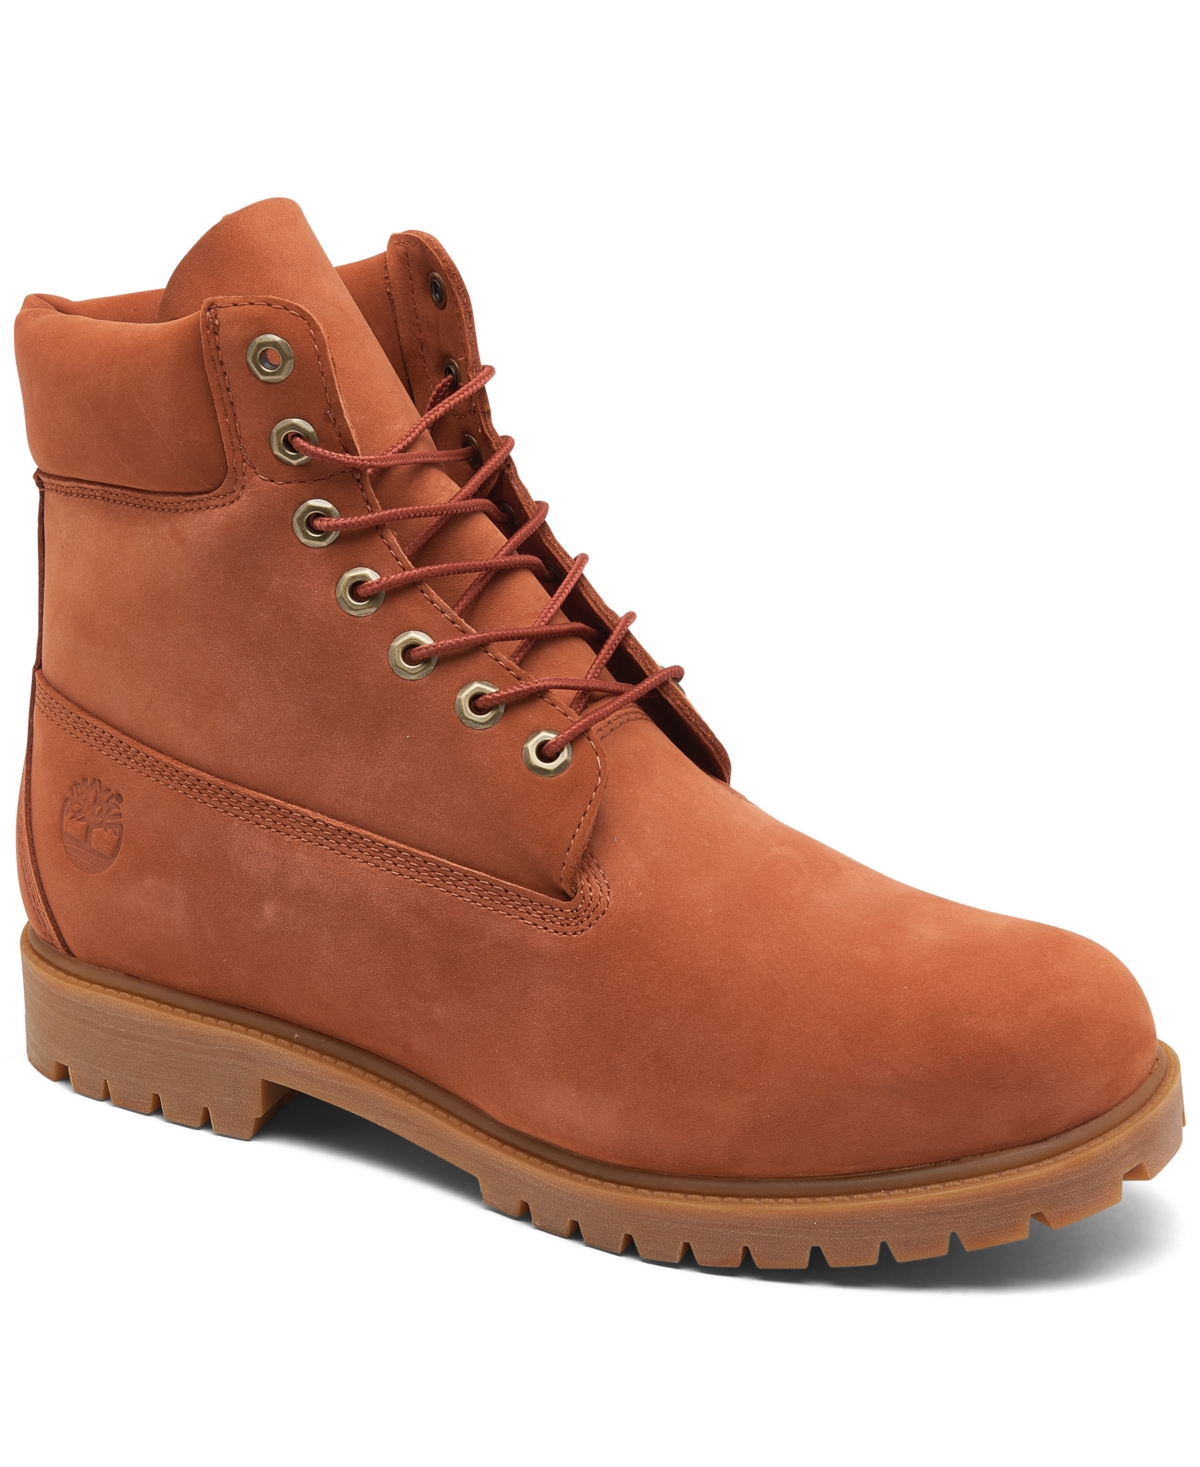 Timberland Men's 6" Premium Water Resistant Lace-up Boots From Finish Line In Dark Rust